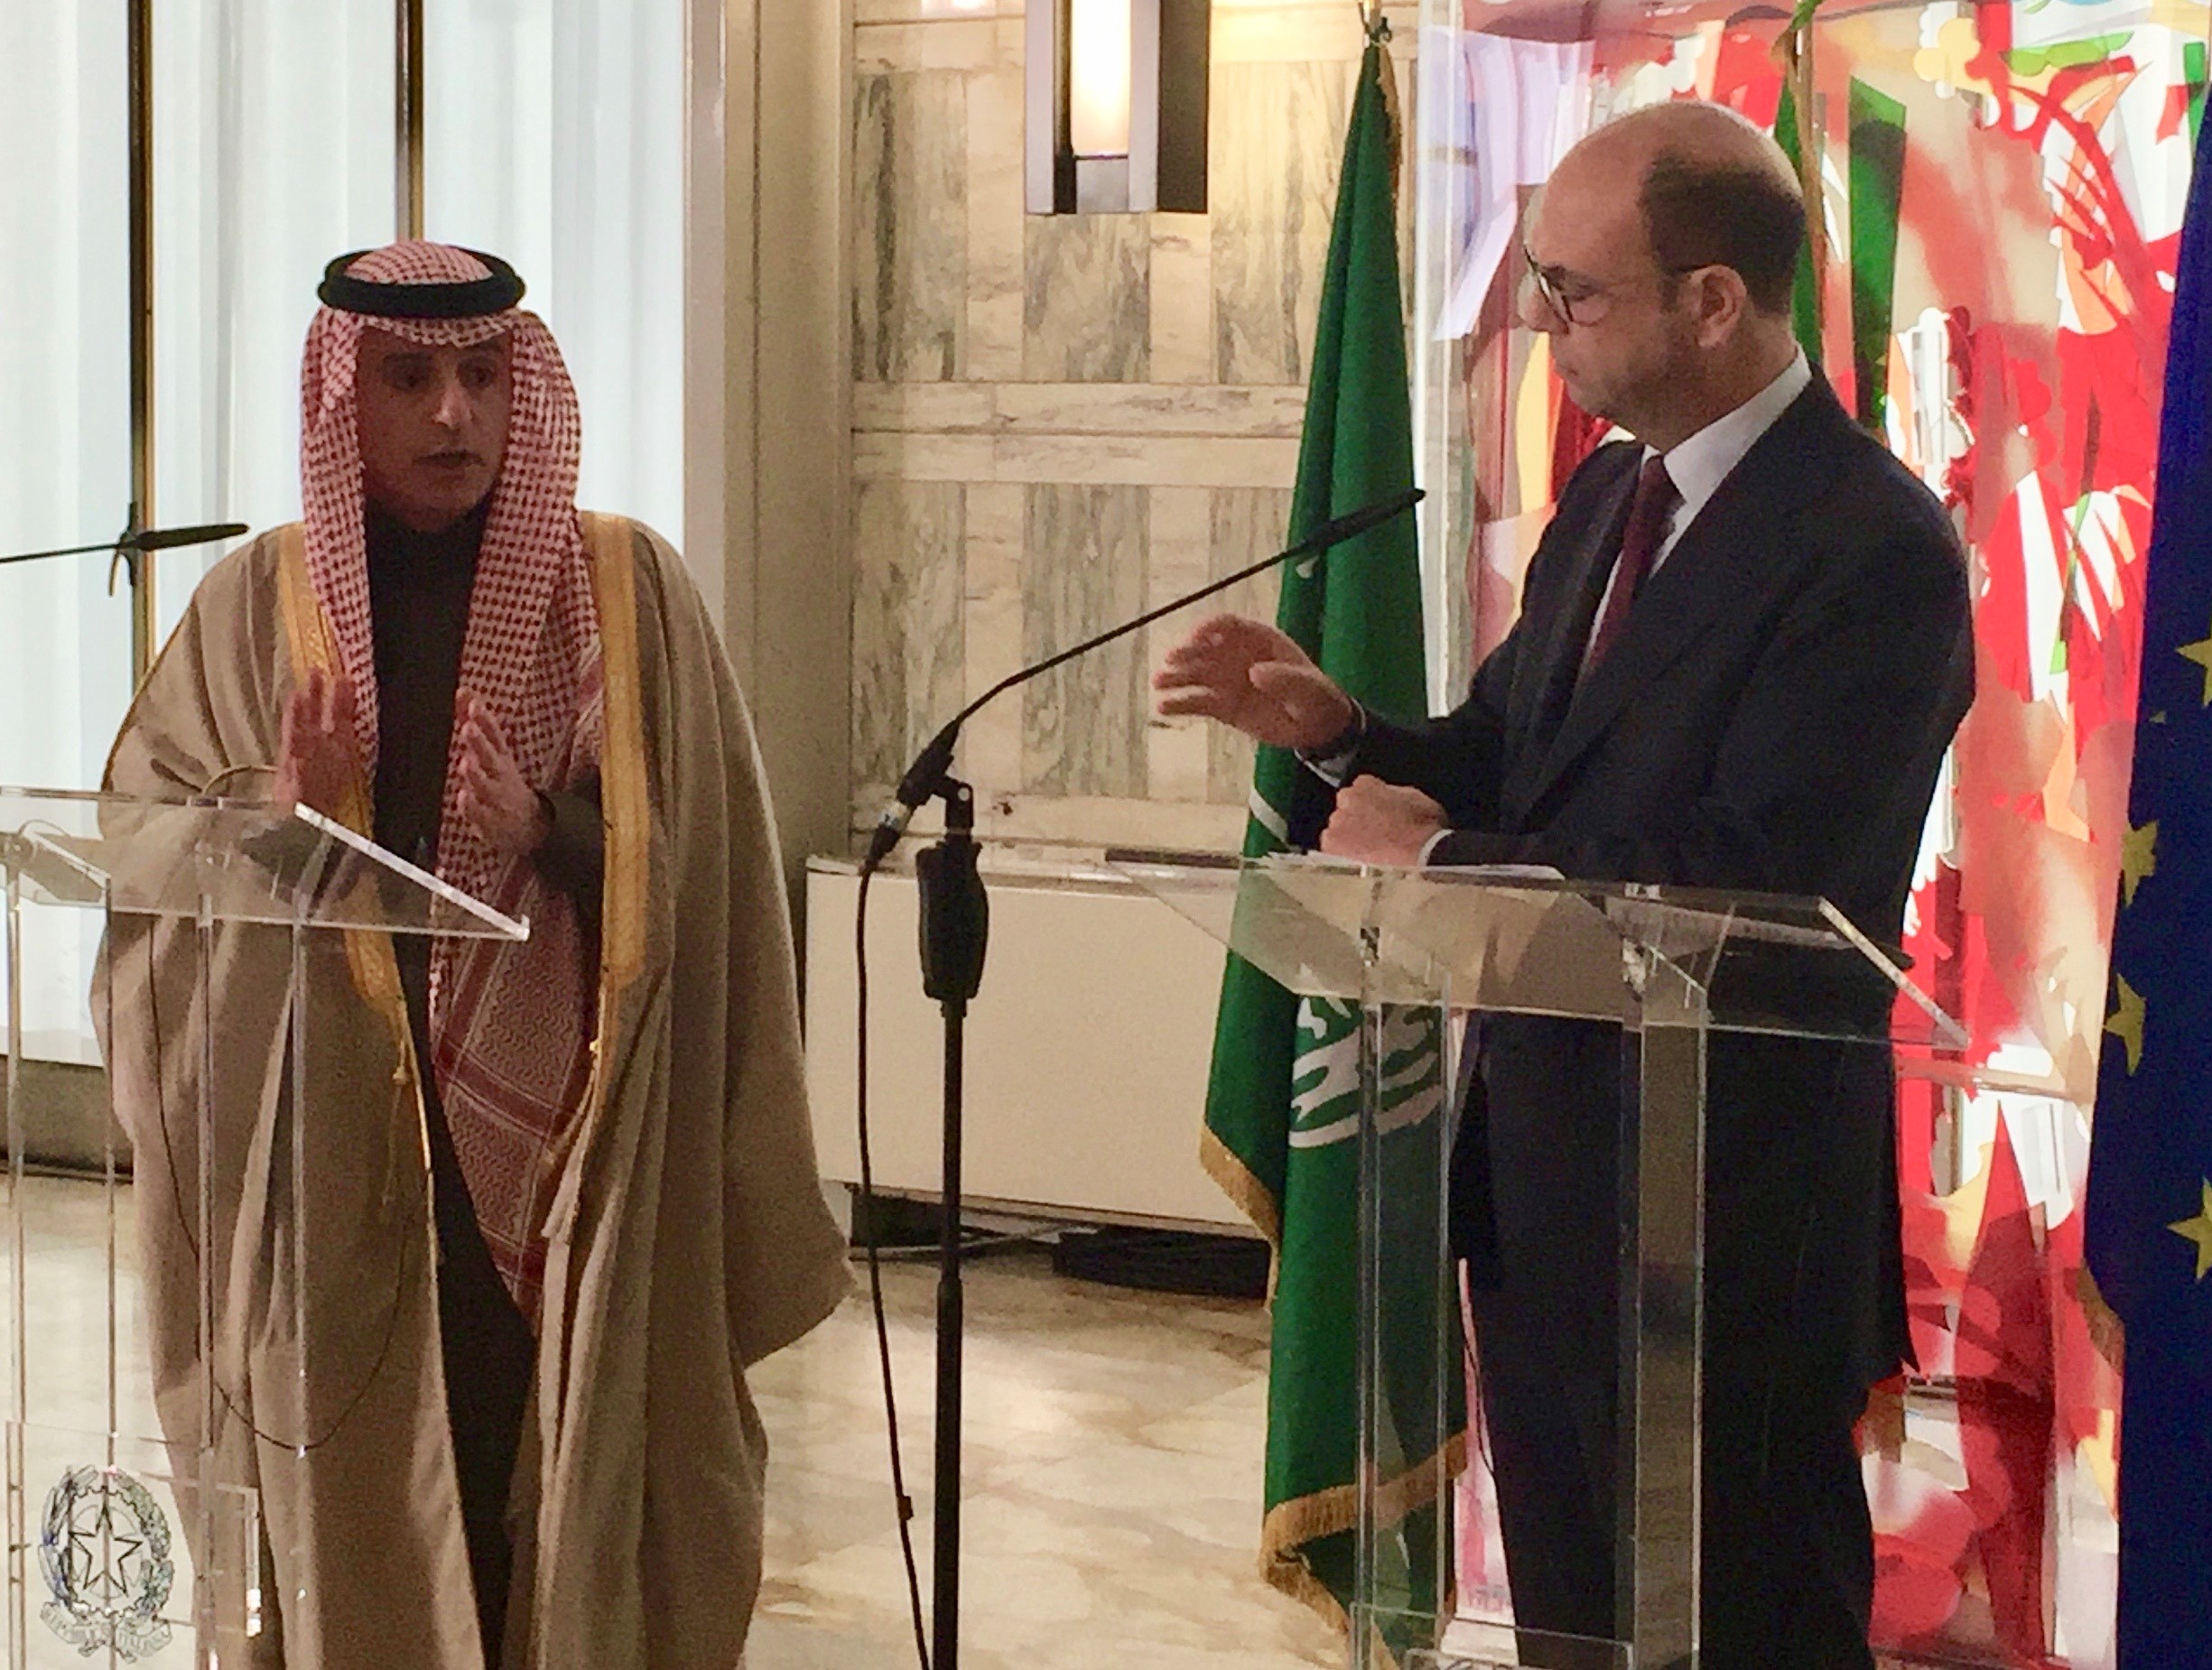 Saudi Foreign Minister Adel Al-Jubeir at a joint news conference with his Italian counterpart Angelino Alfano